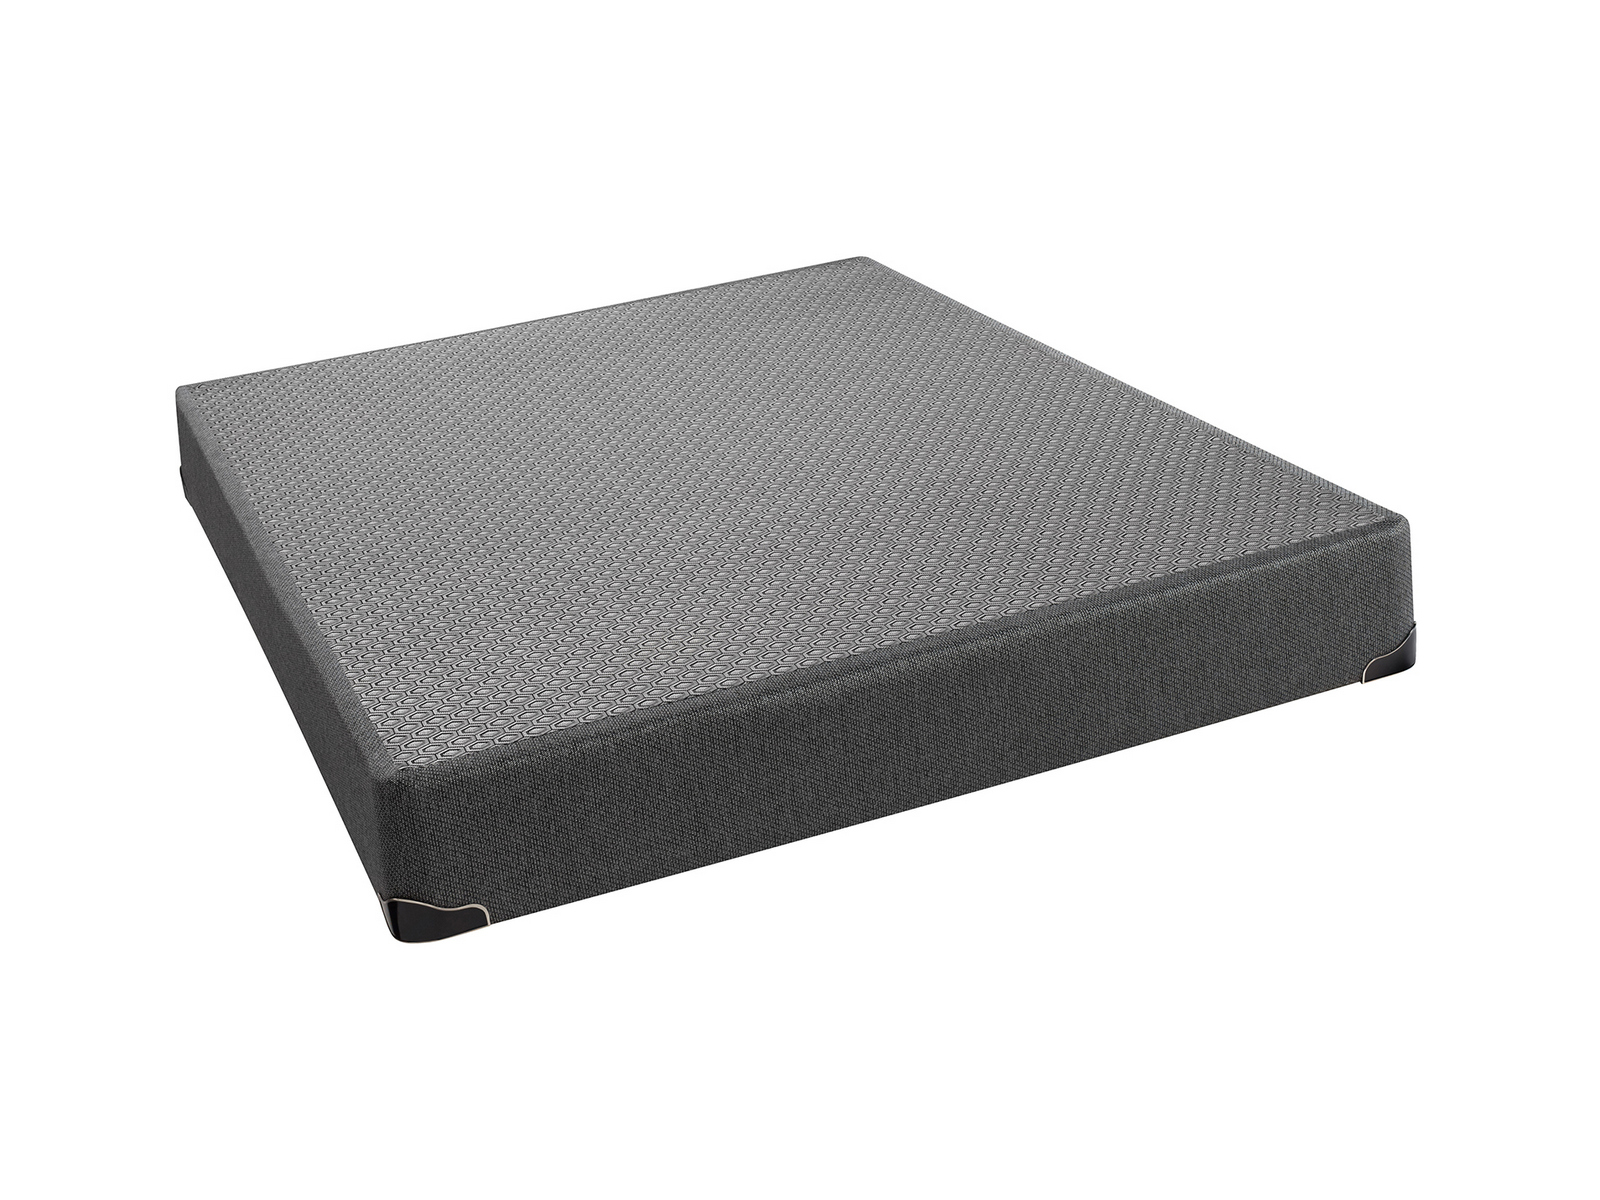 Beautyrest Box Spring | Queen | 5 Low Profile | Black Hybrid